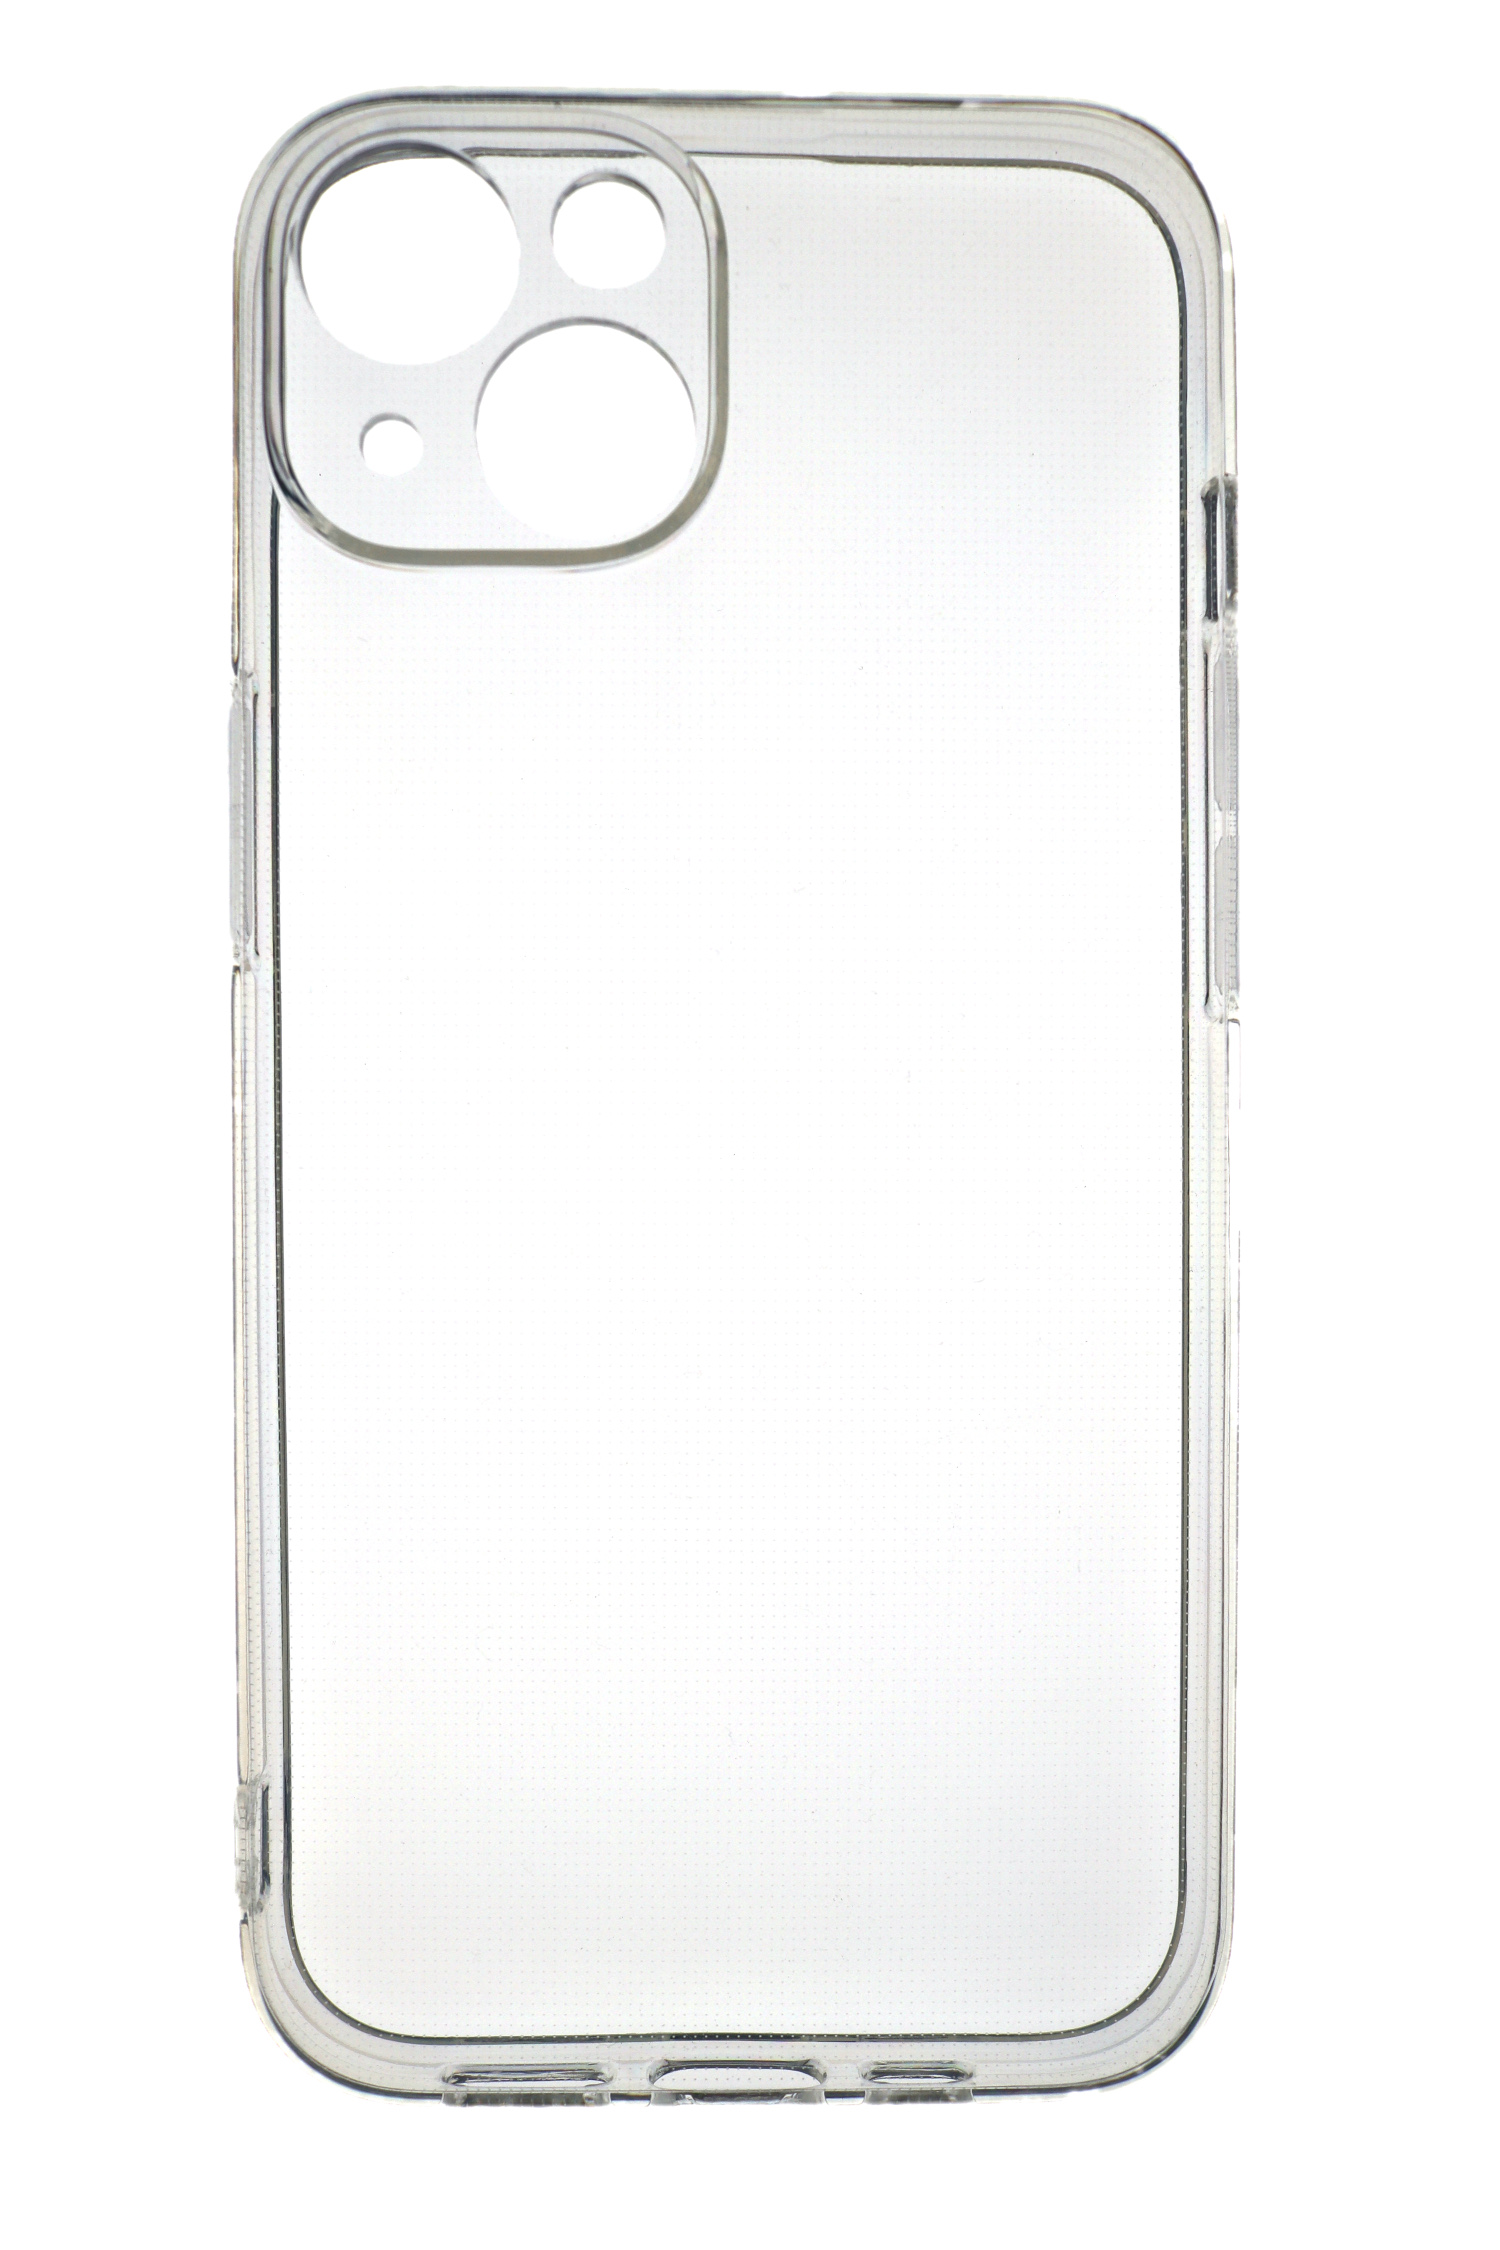 JAMCOVER 14, mm iPhone Case Transparent Backcover, TPU Apple, 2.0 Strong,